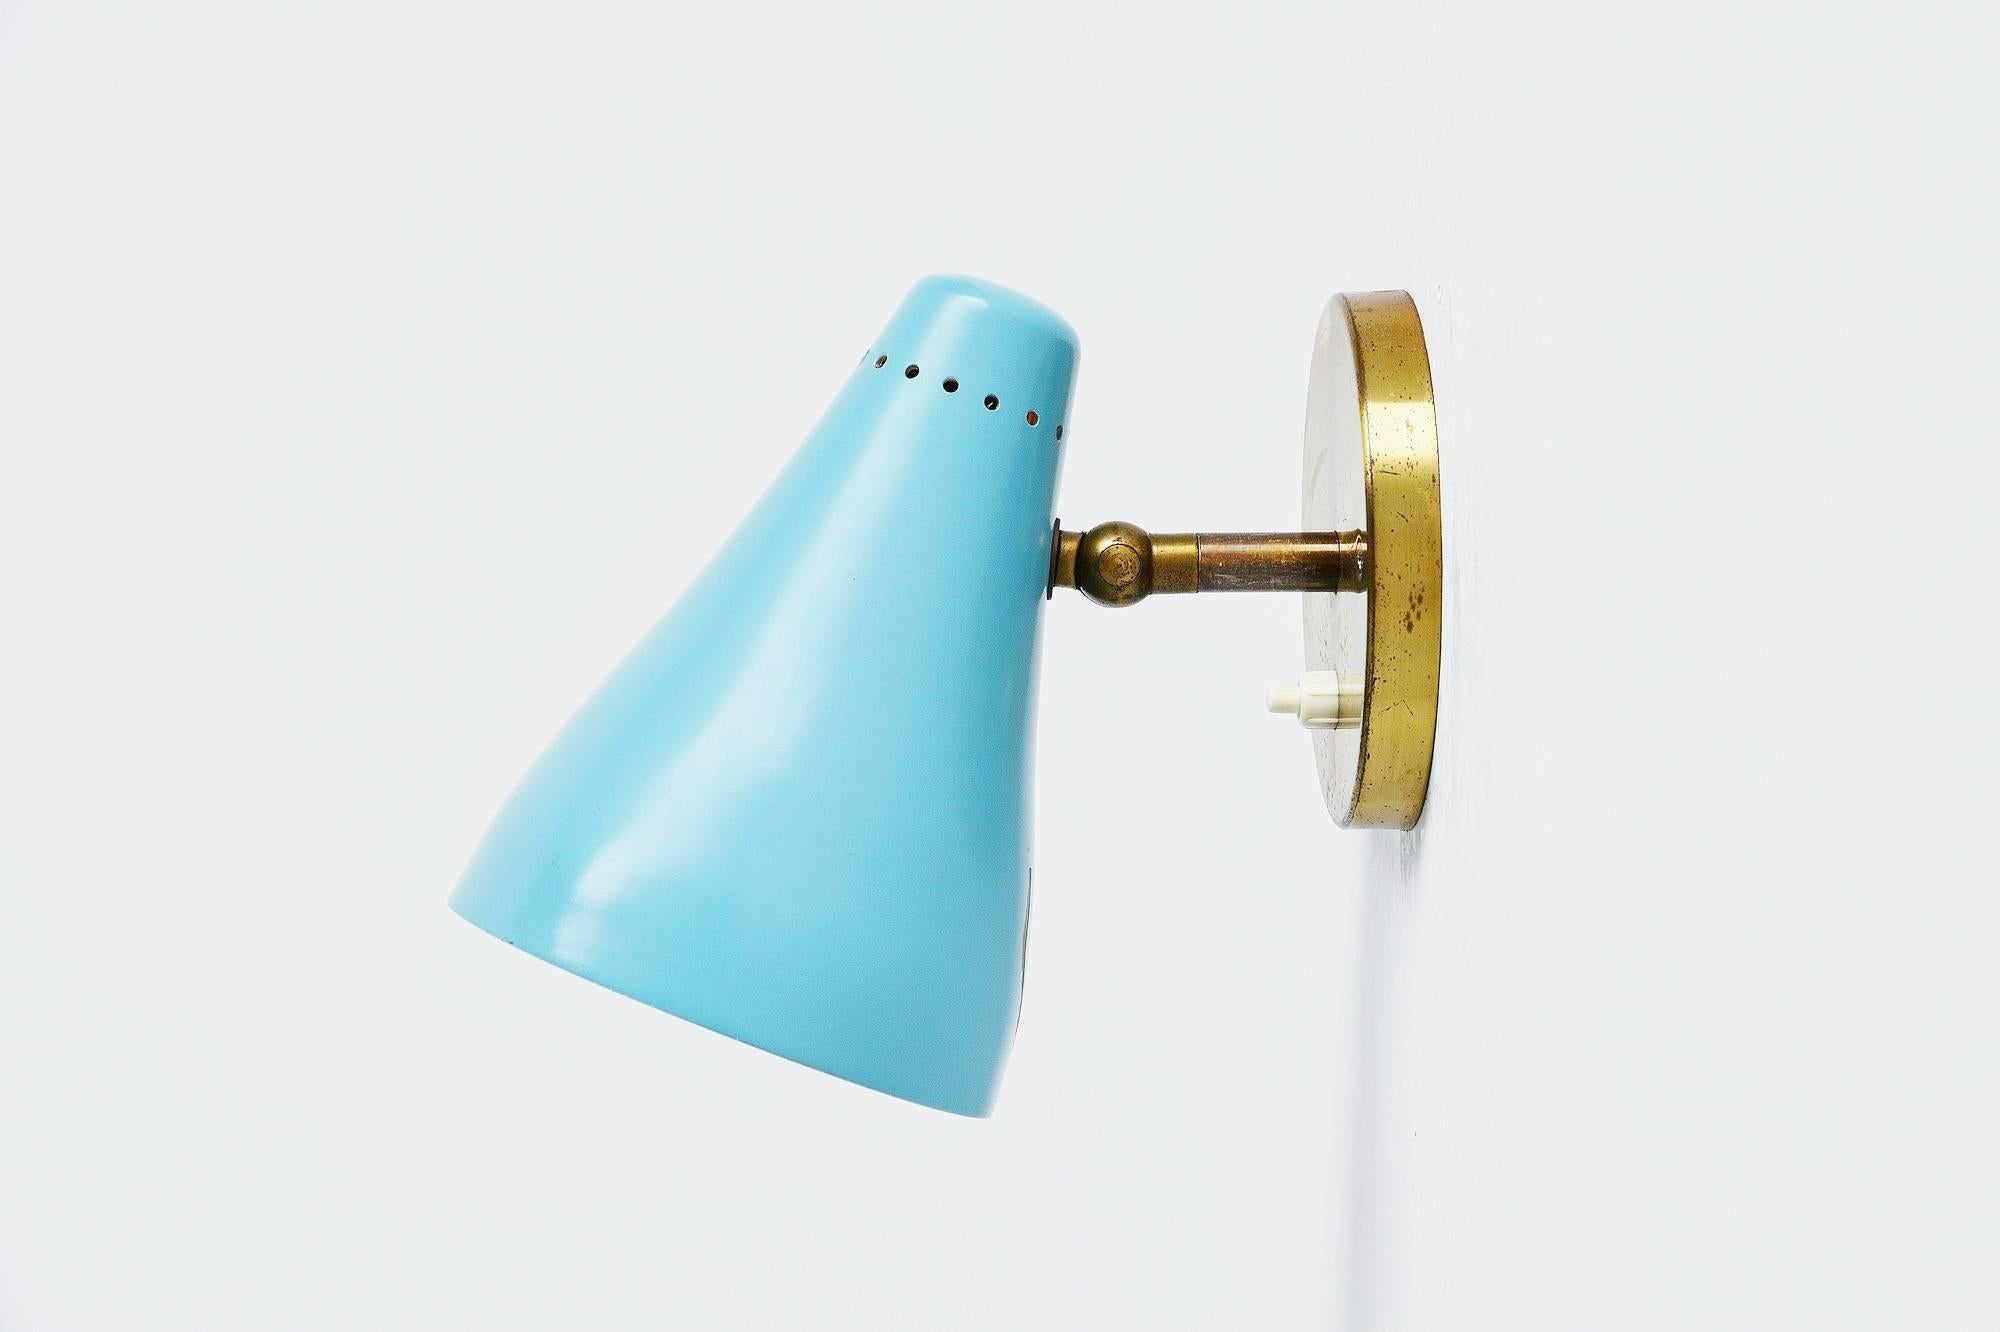 Early sconce model 16c designed by Gino Sarfatti, manufactured by Arteluce, Italy, 1948-1950. This early wall lamp has a brass wall plate and a blue painted shade with die cut dot pattern at the top of the shade. The lamp is unmarked but written